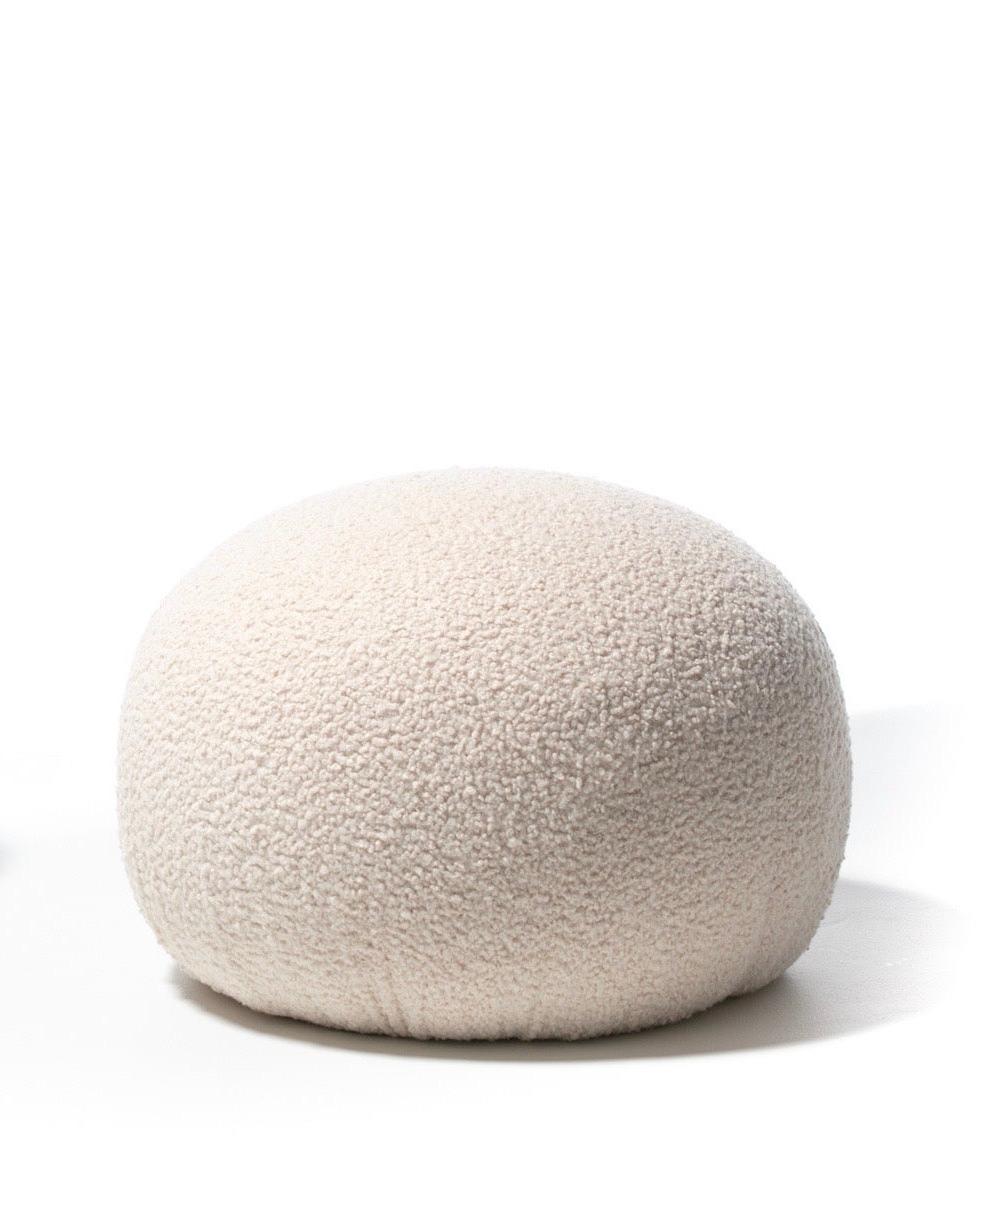 Timelessly sexy pair of poufs ottomans by Directional professionally reupholstered in soft ivory white bouclé with high durability rating. Plush and comfortable, the poufs can be easily incorporated as ottomans with other designer pieces. Want to